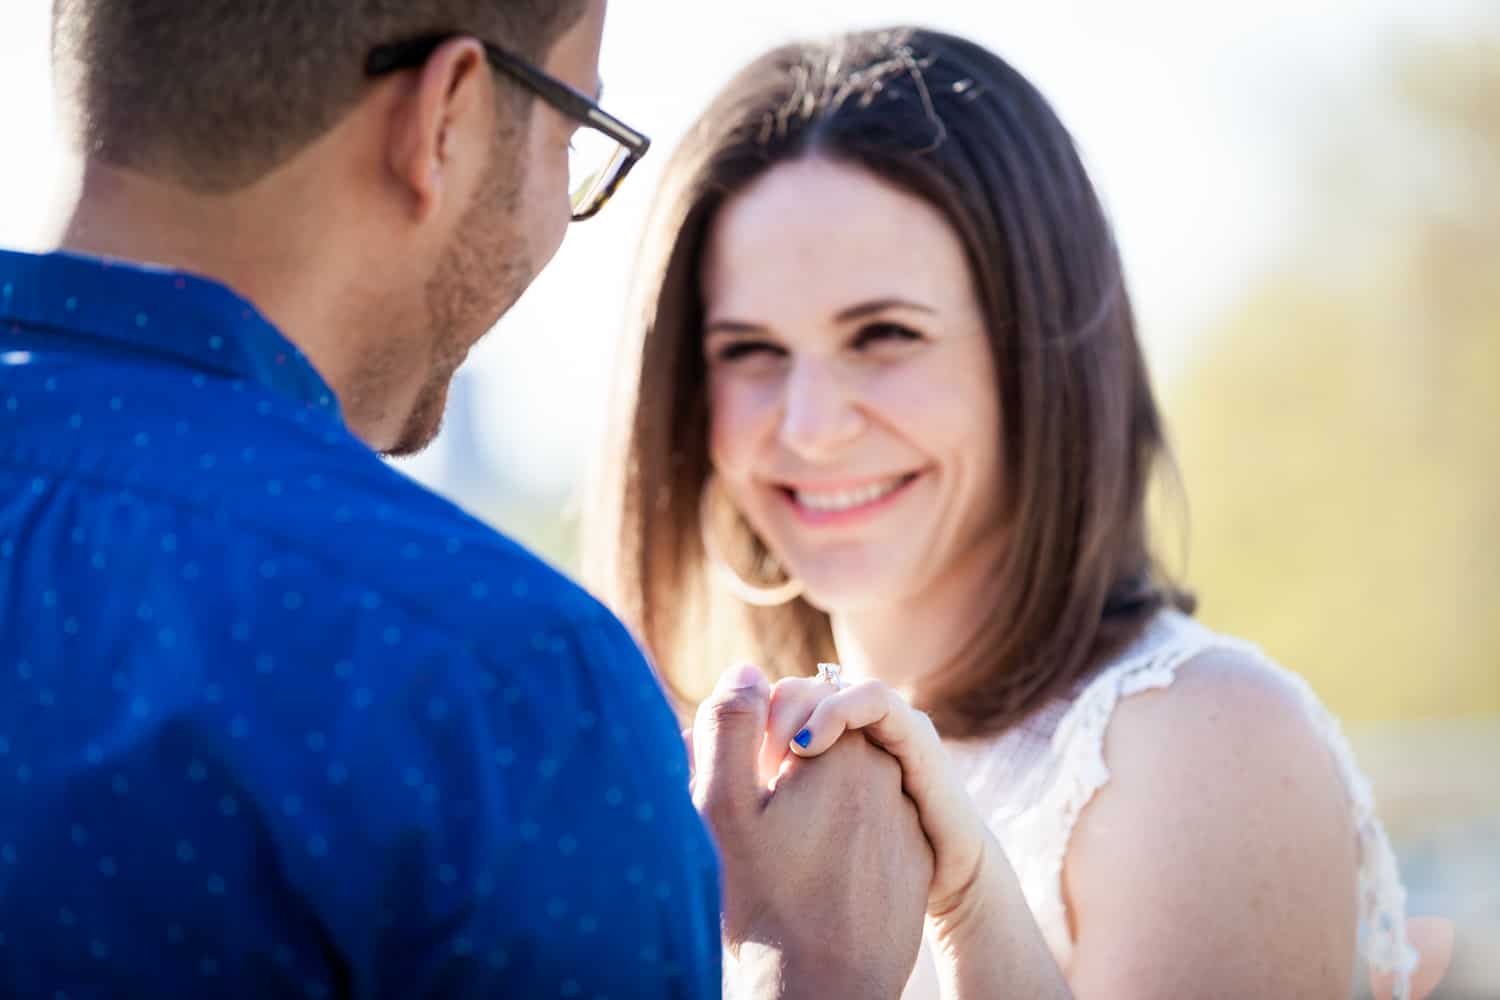 Woman showing engagement ring to man during an Astoria Park engagement shoot